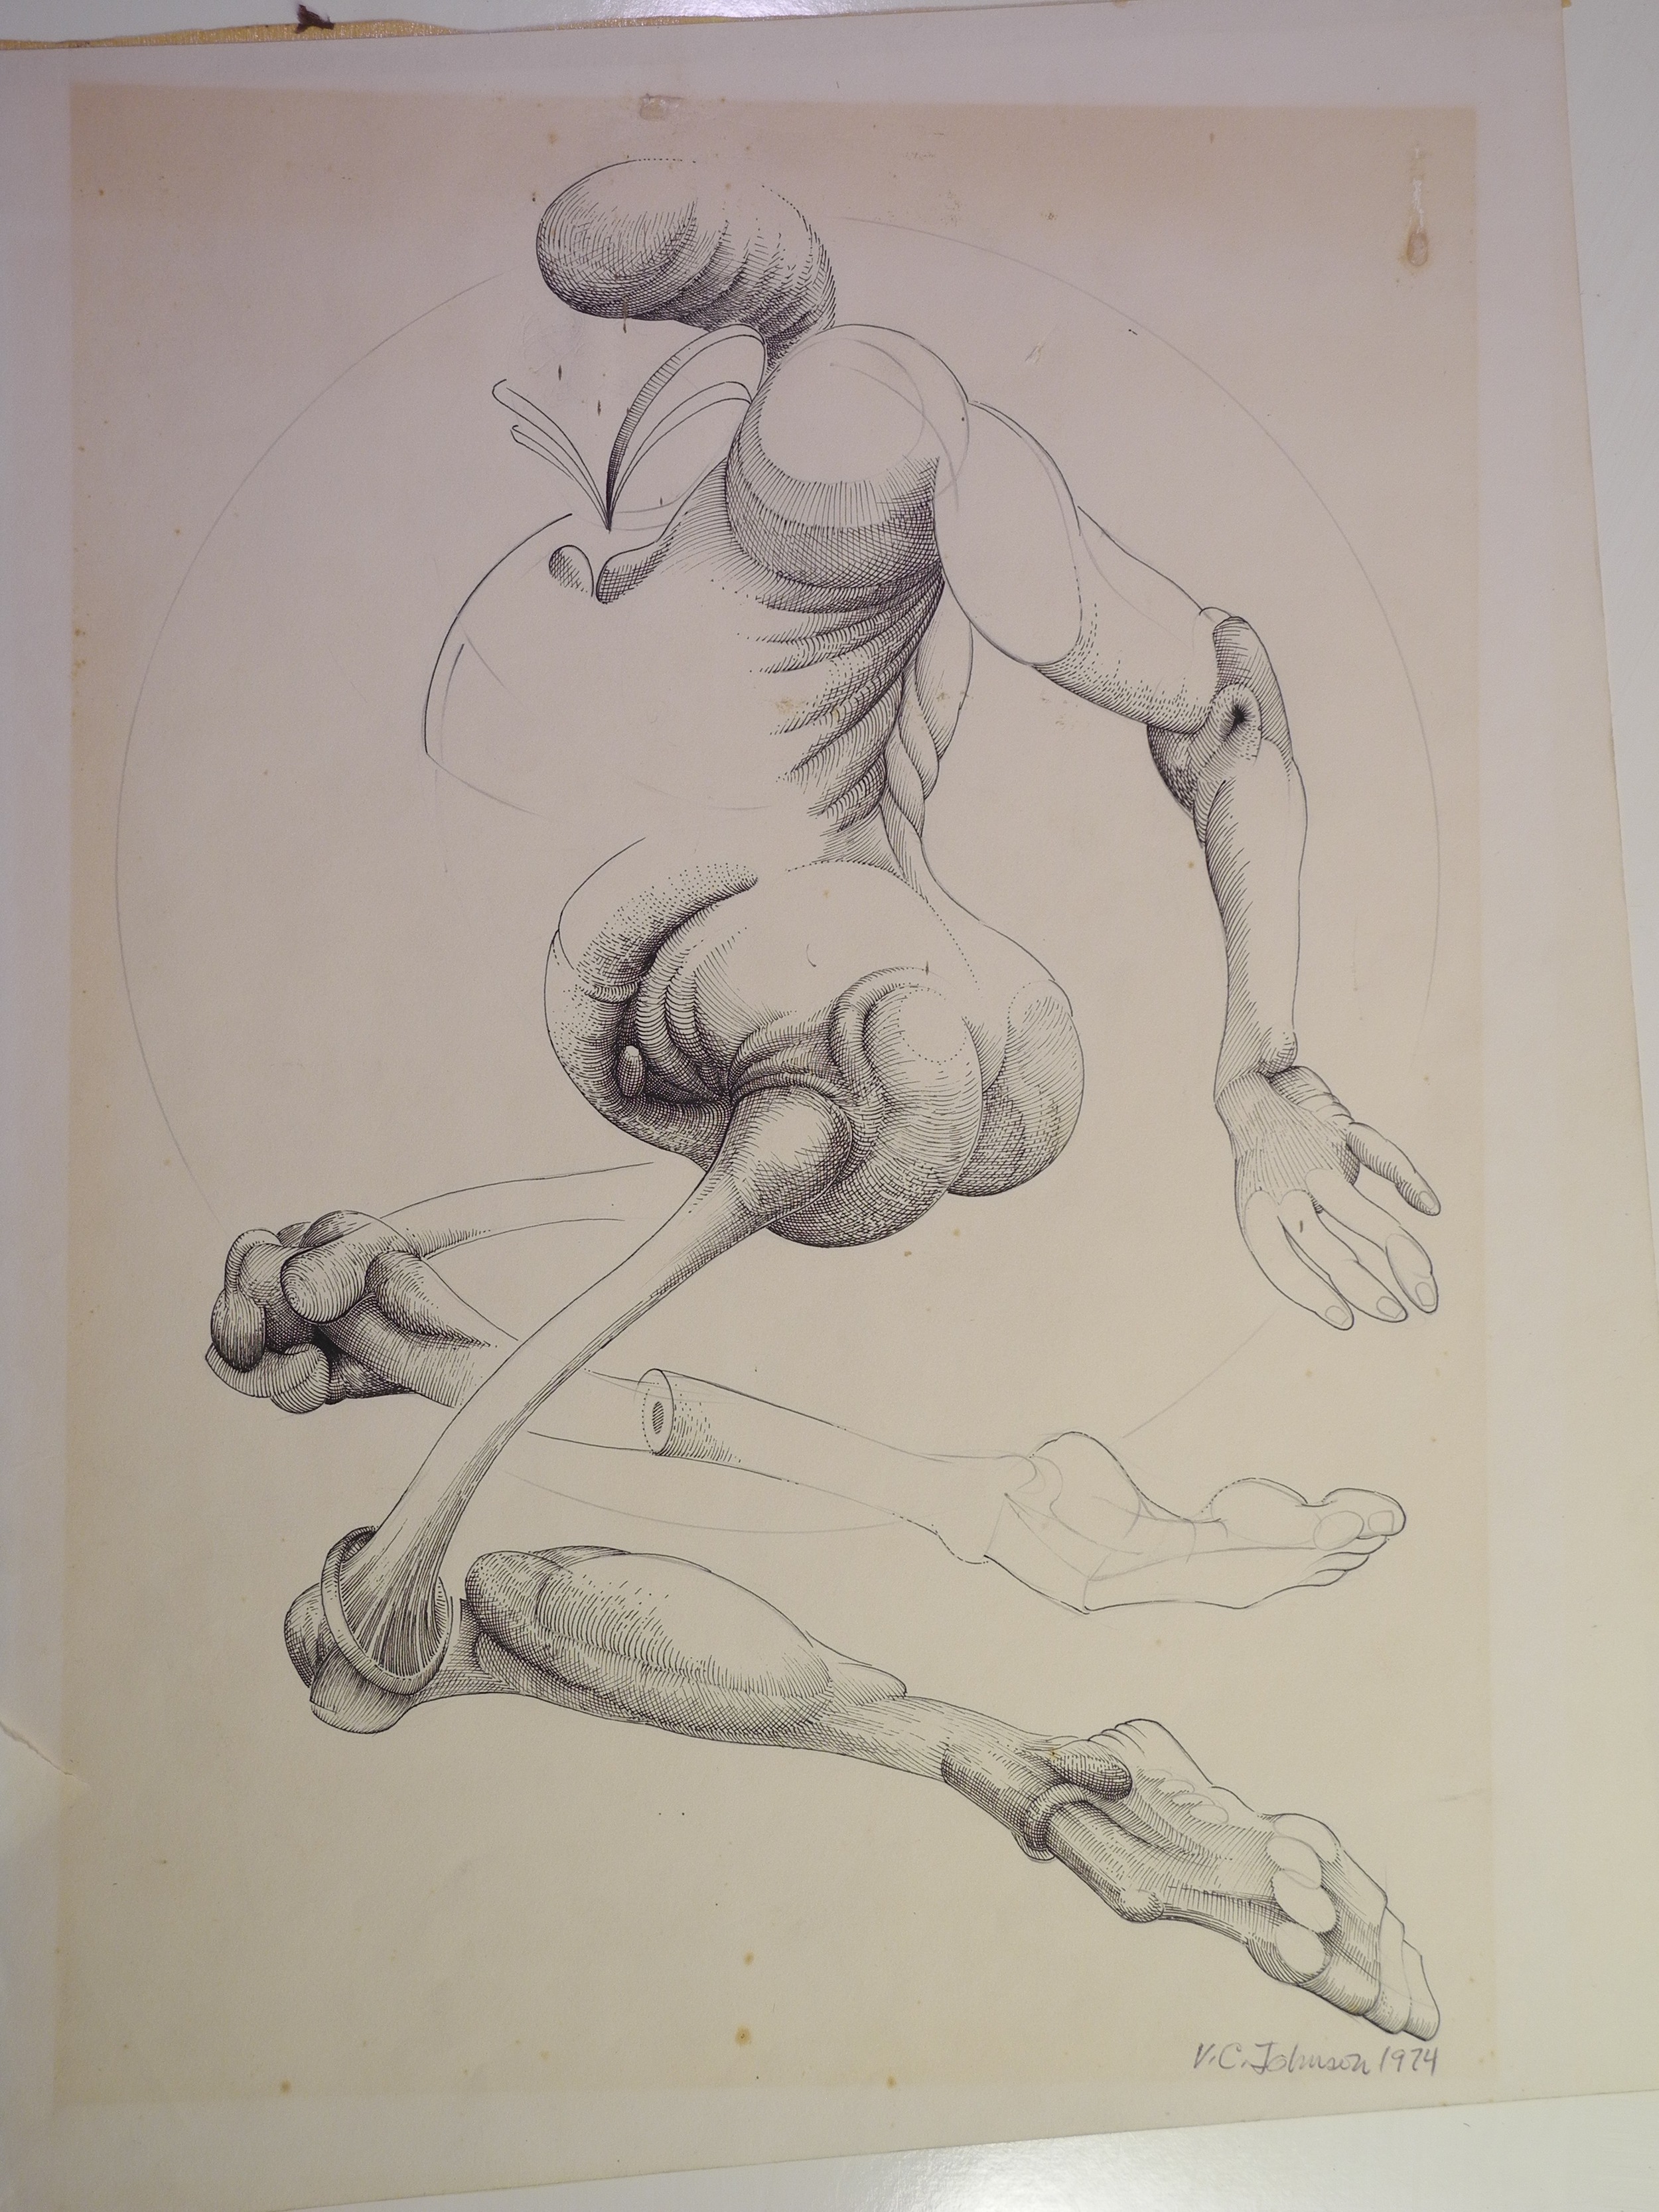 "Bizarre Figure Study" by Vernon Courtlandt Johnson. © 1974 VCJ. All rights reserved.